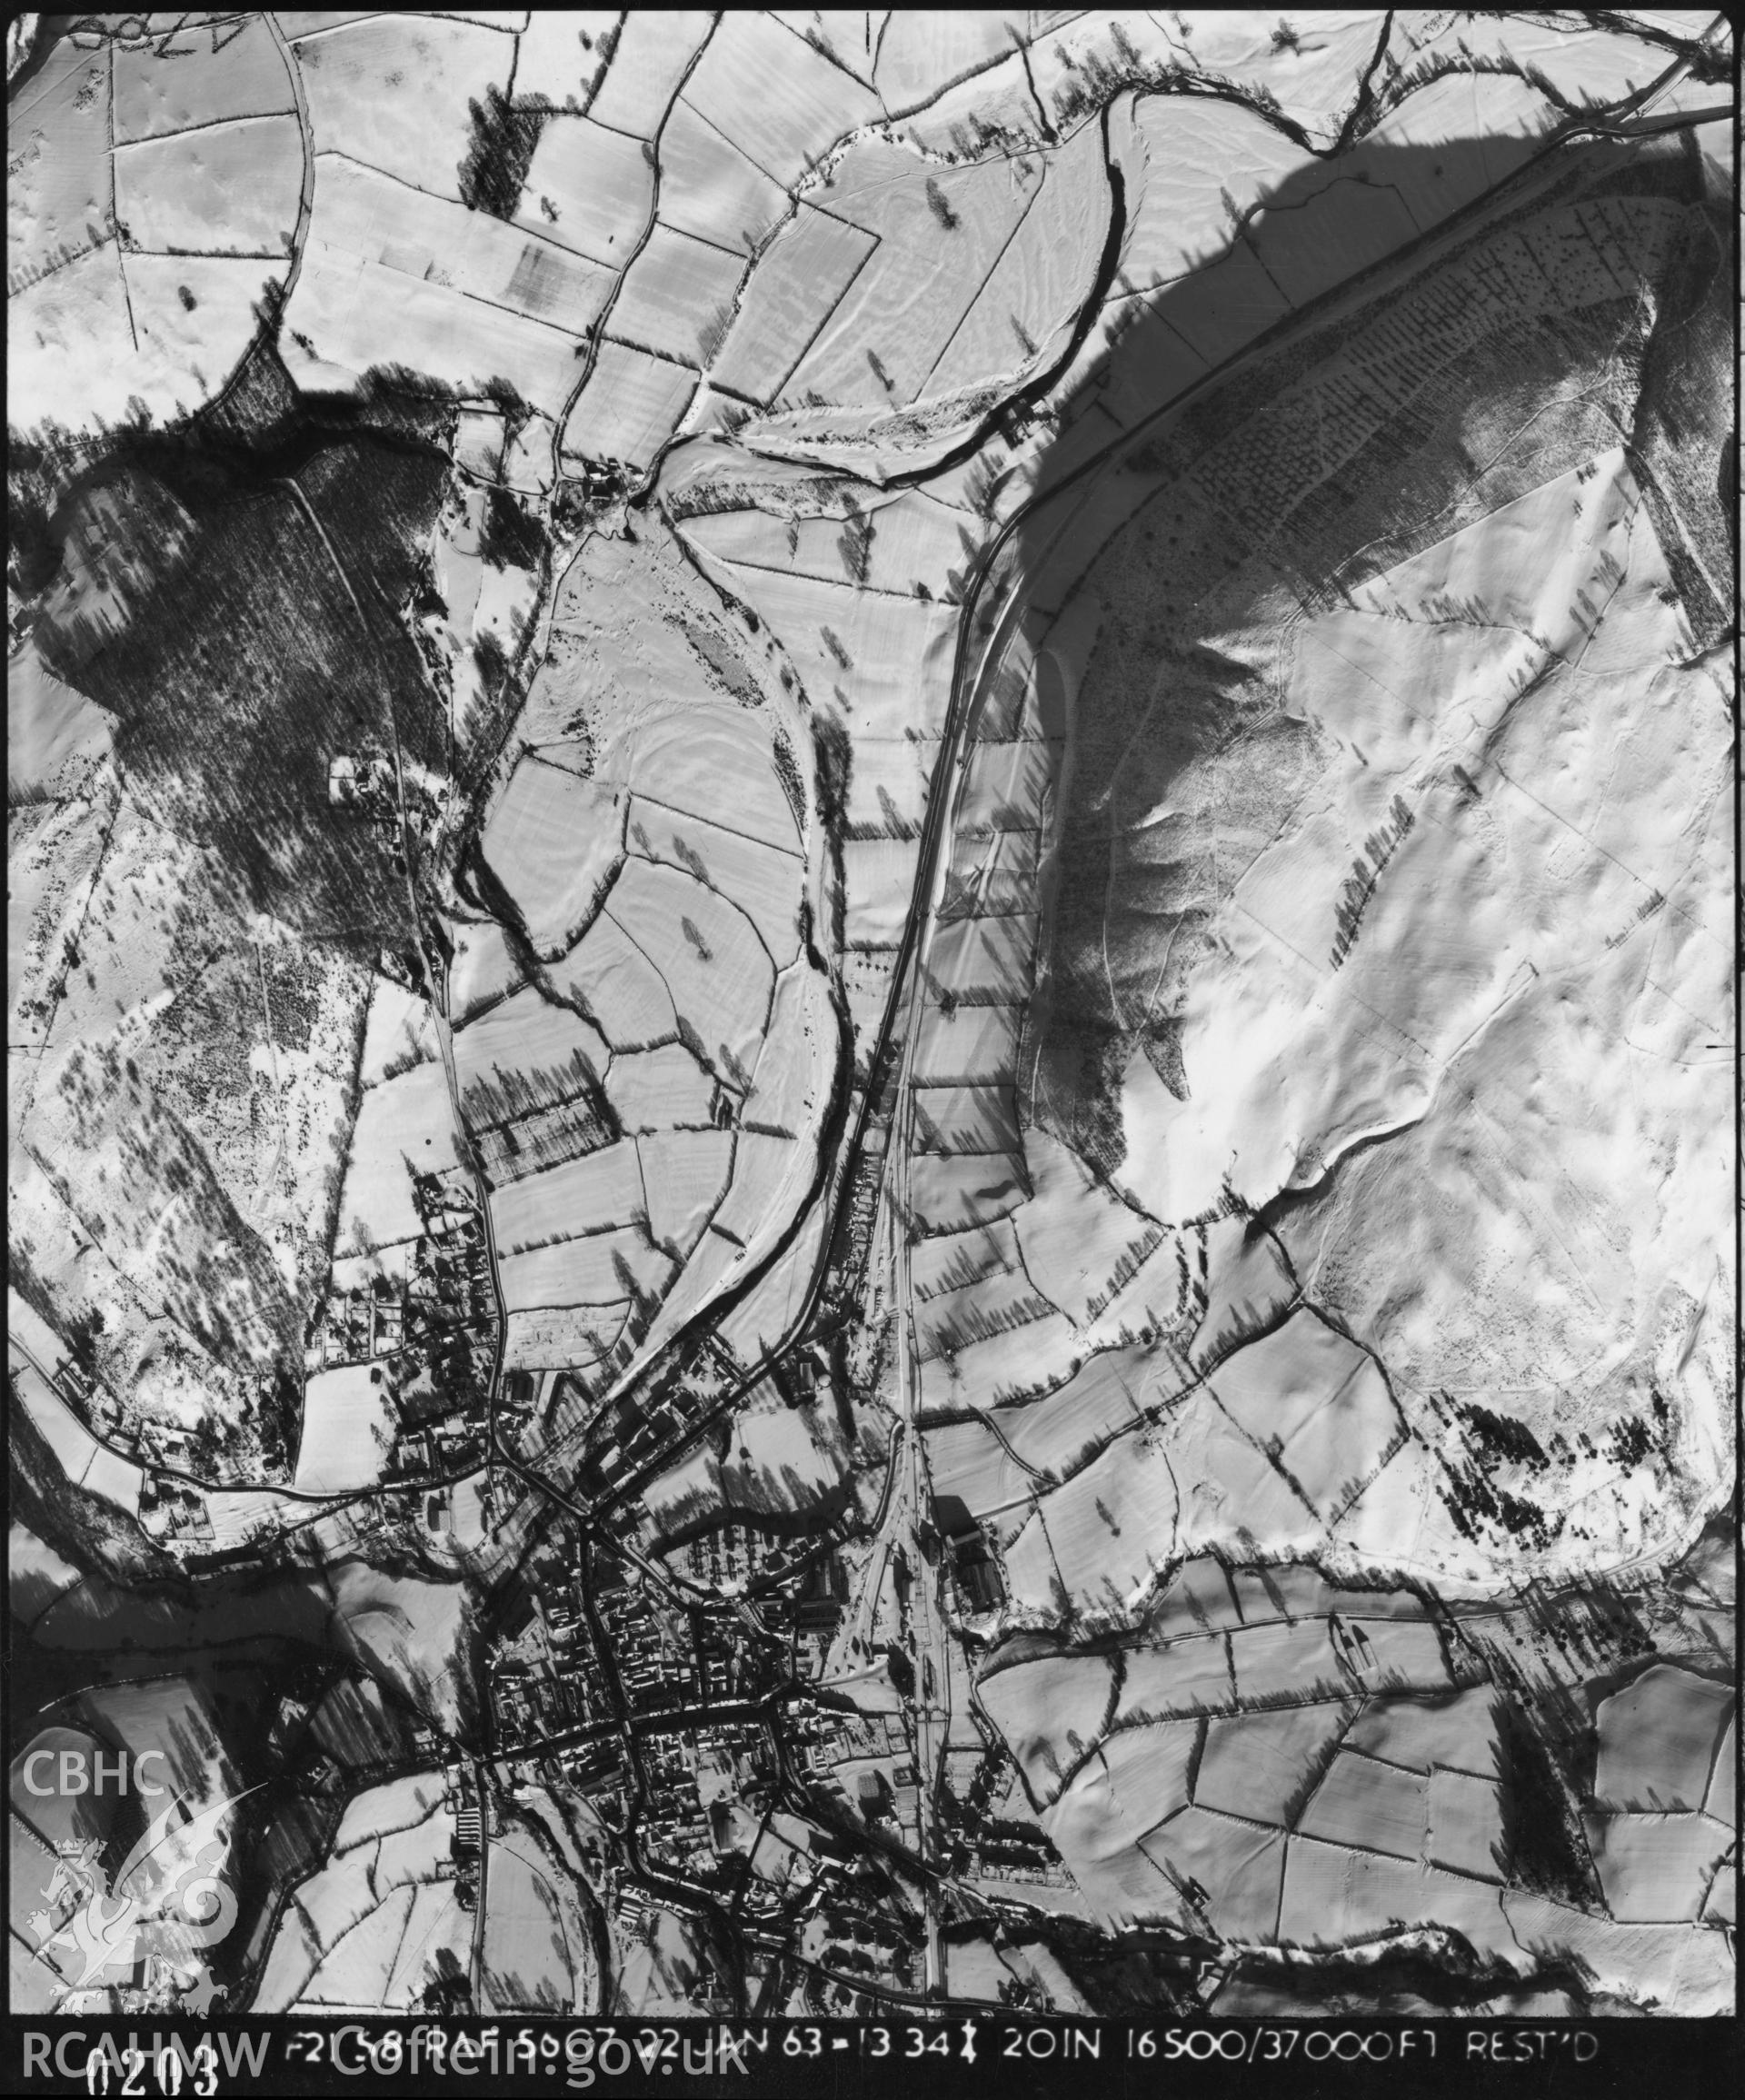 Black and white vertical aerial photograph taken by the RAF in 1963, centred on the area around Llanidloes..